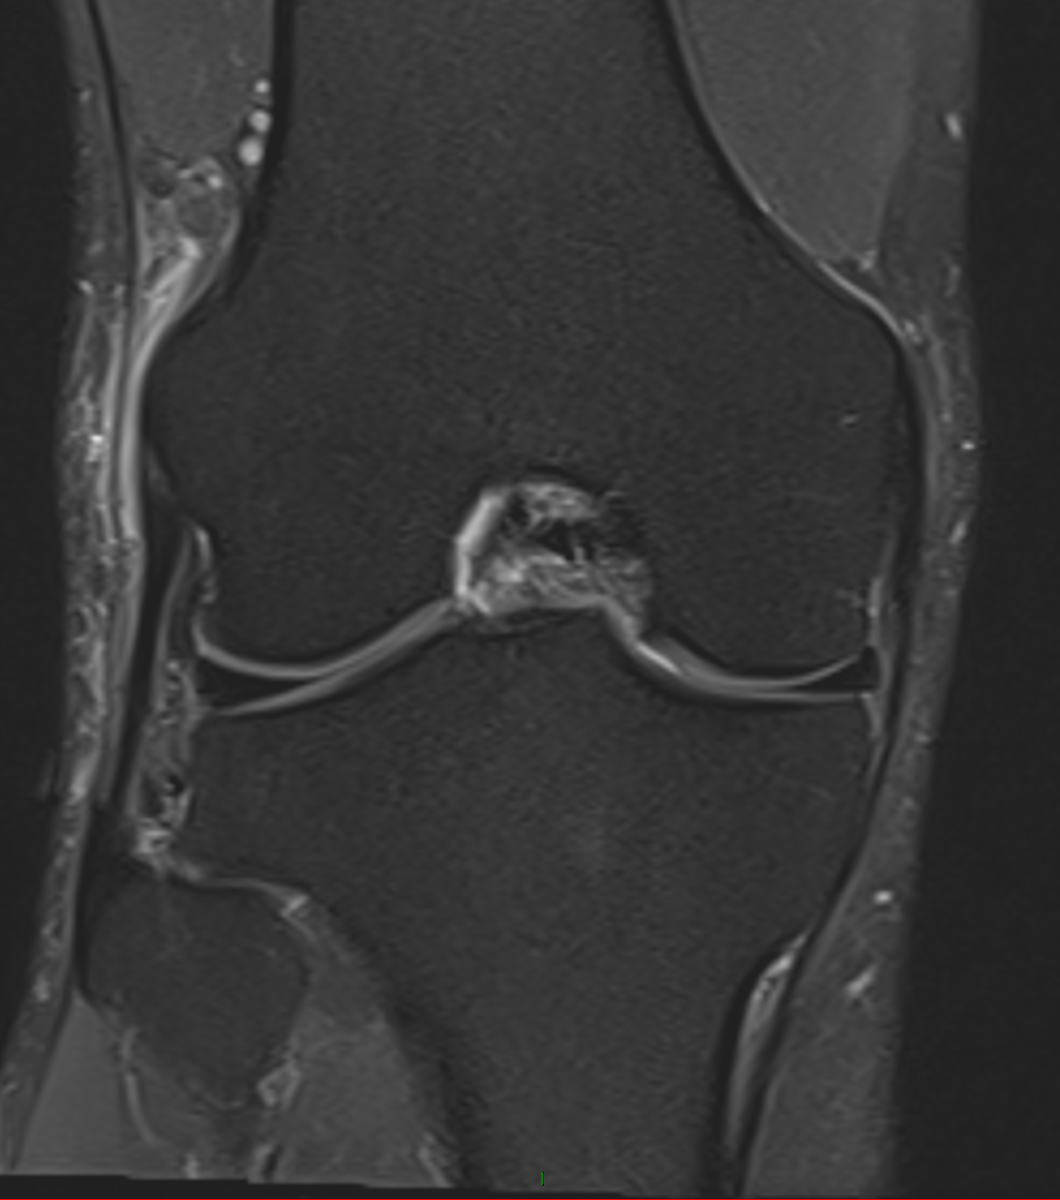 Recreational Cyclist. Lateral knee pain. Iliotibial band syndrome: High signal in STIR due to Inflammation of the fat adjacent to the iliotibial band.